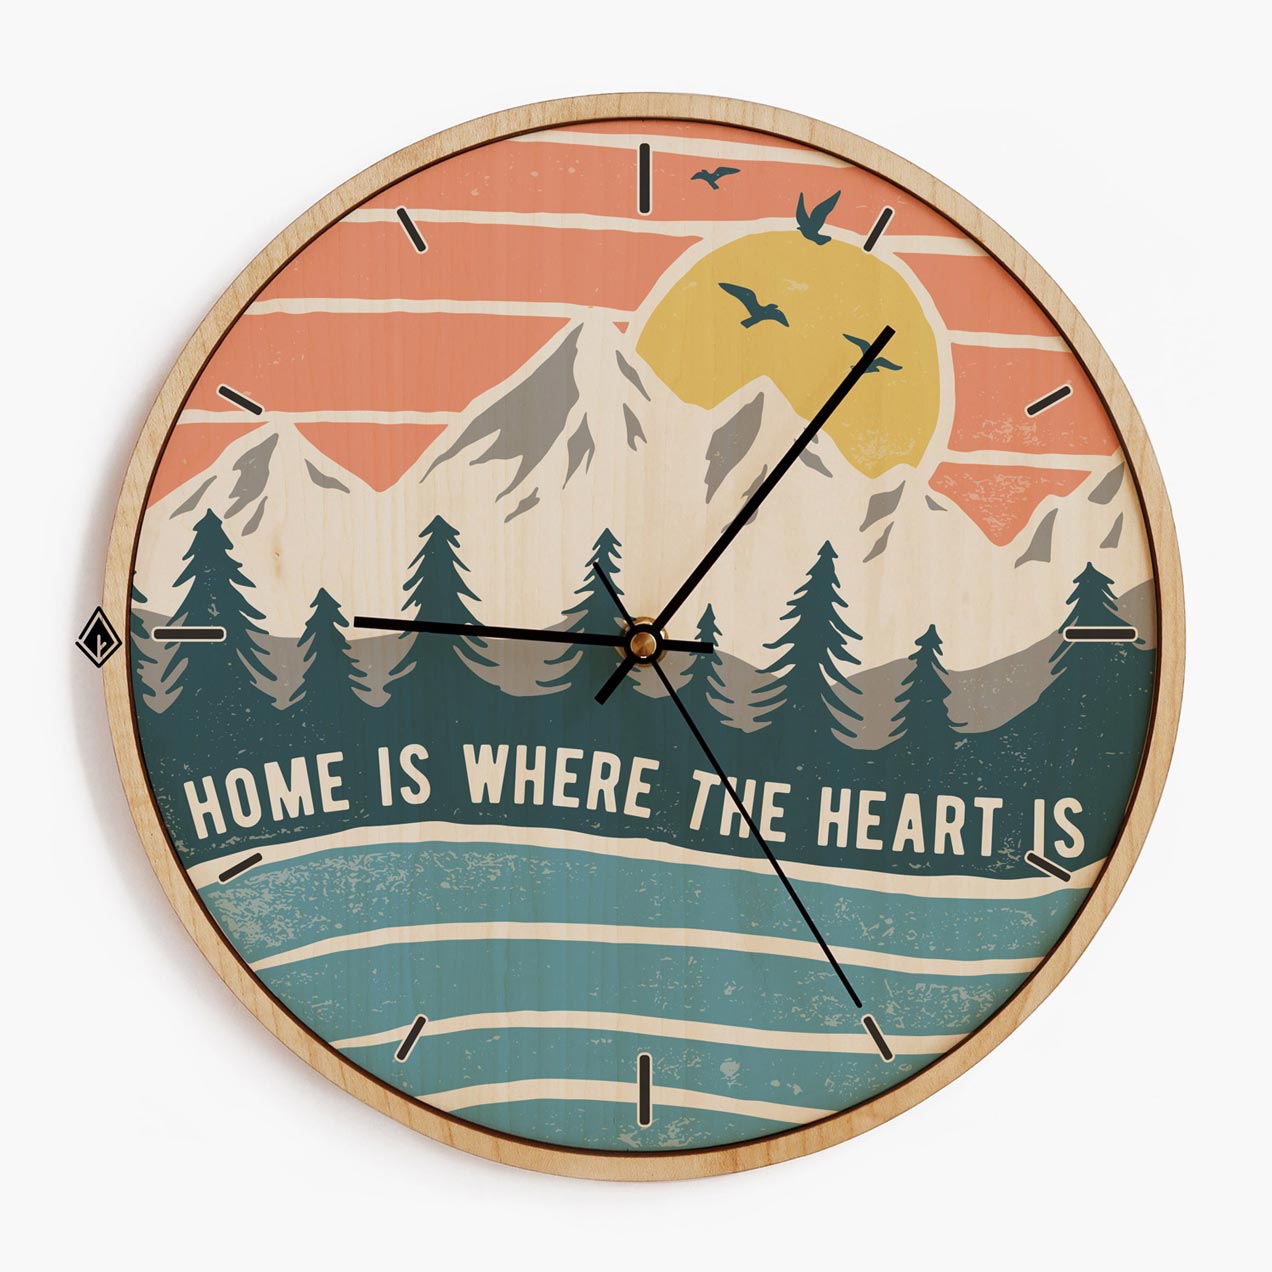 Wooden Wall Clocks Home is where the heart is